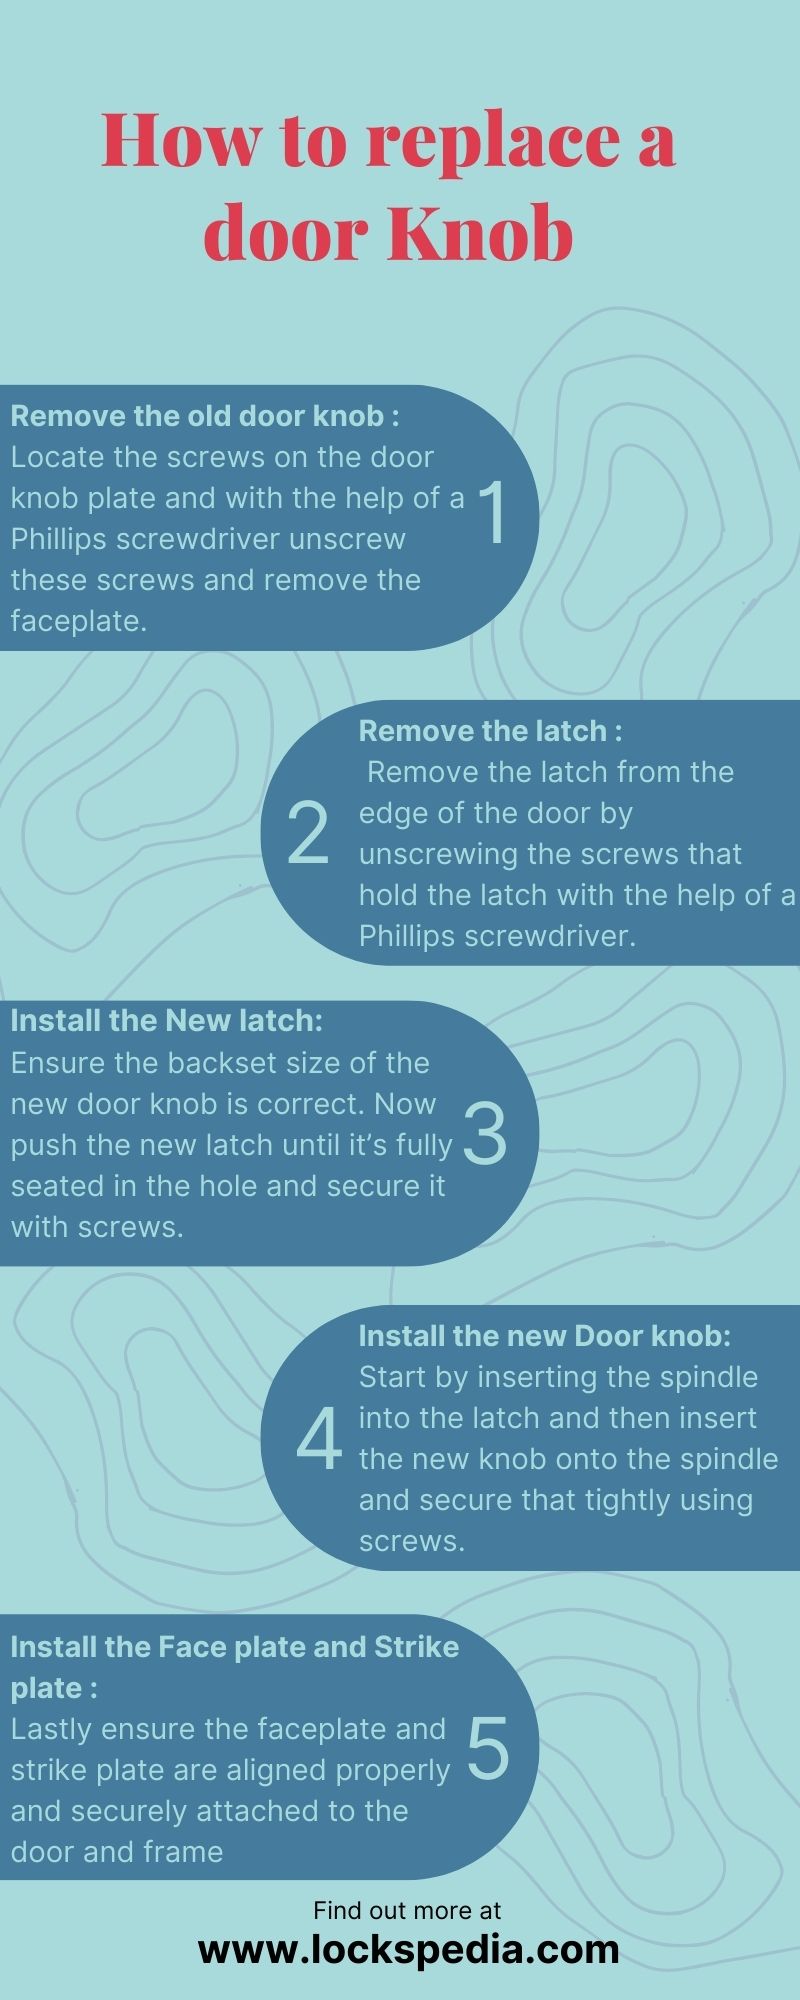 How to replace a doorknob infographic